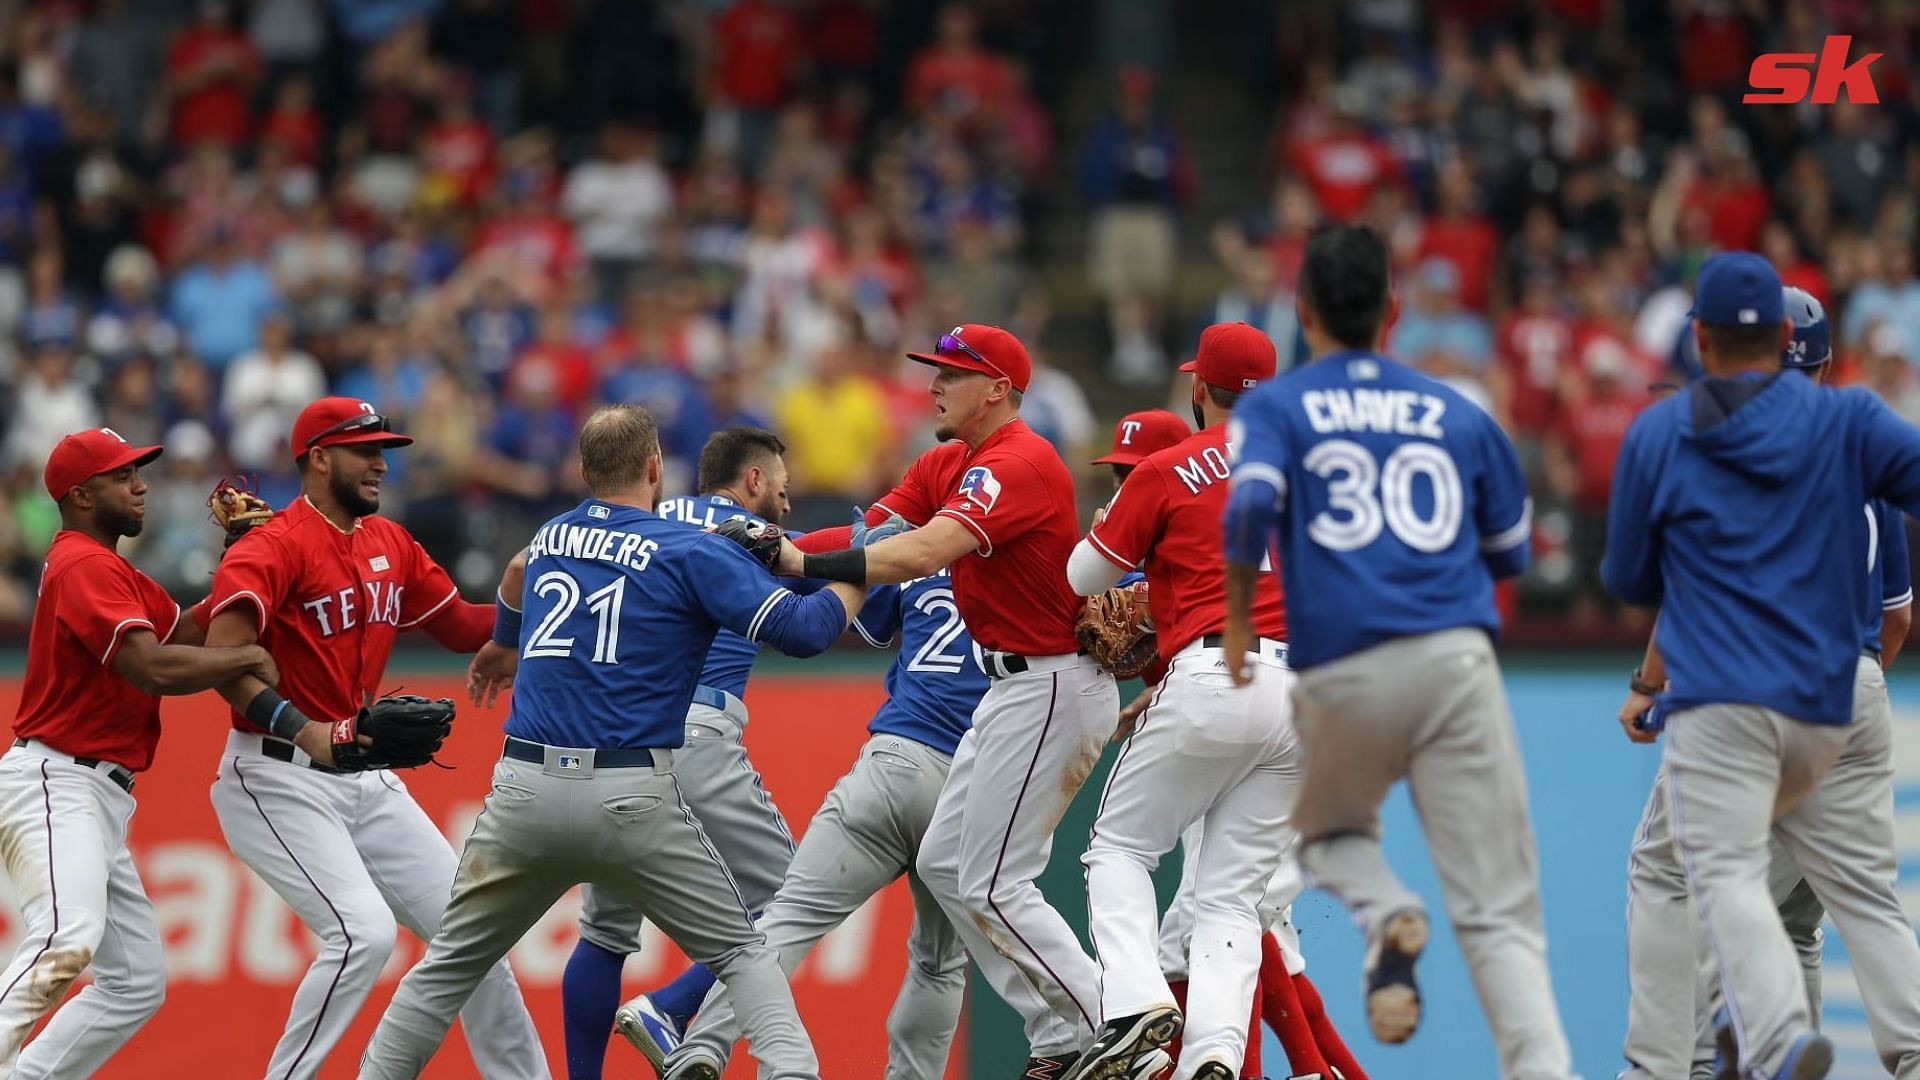 When Jose Bautista shot back after Rougned Odor clash that set off iconic bench-clearing brawl